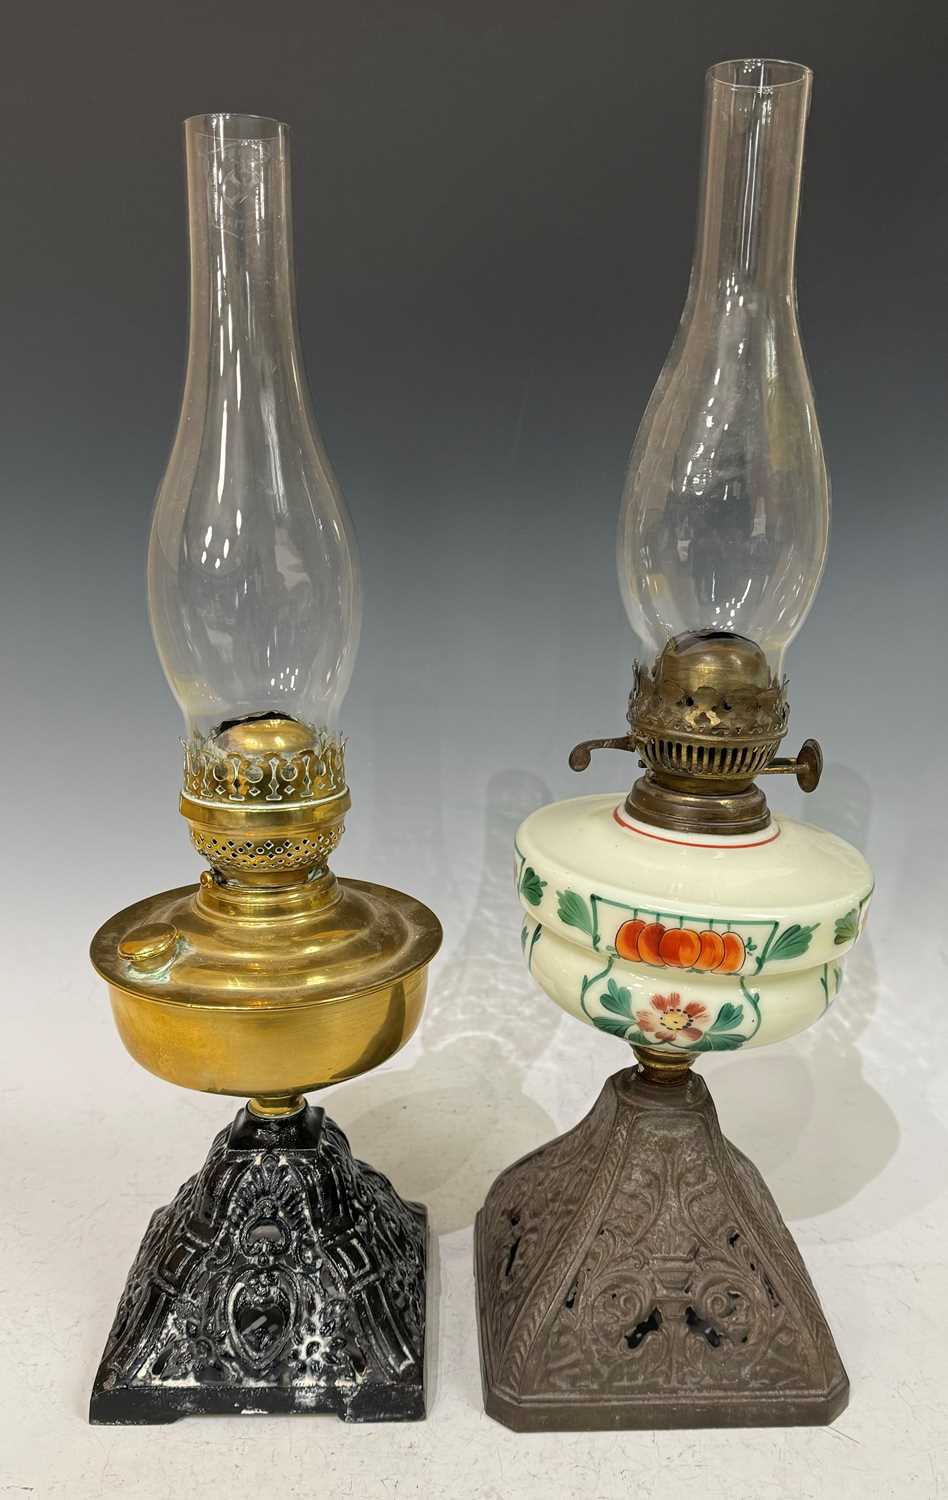 An early 20th century oil lamp, with twin 'Duplex' burner adjusters, above an opaque green glass